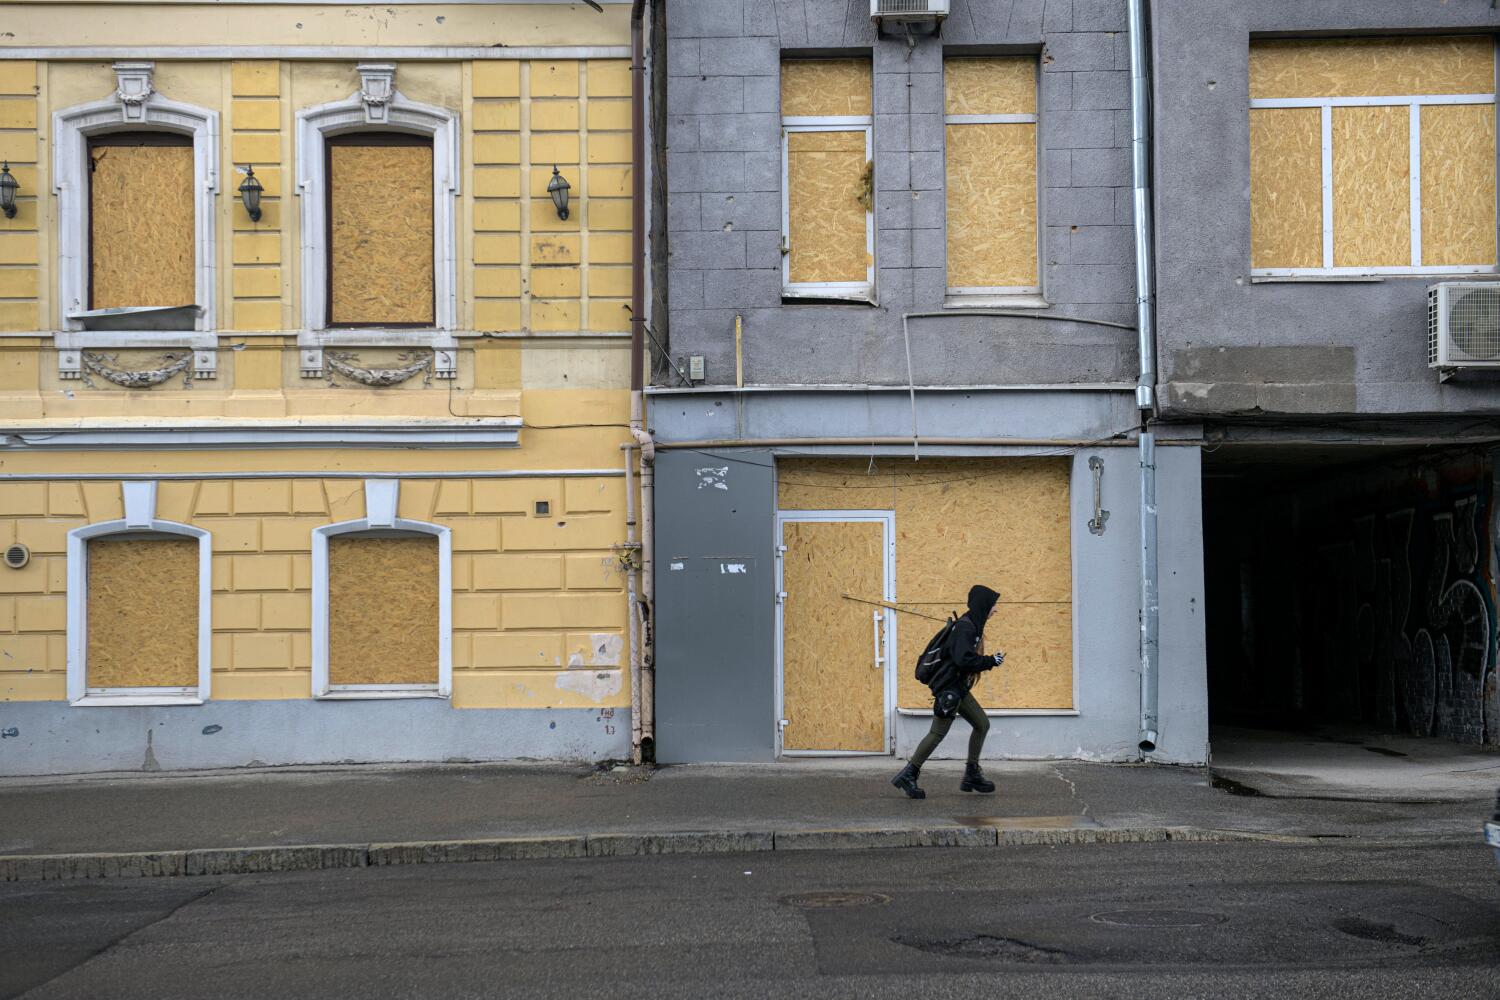 pummeled by airstrikes, ukrainians in kharkiv defy russia by getting on with daily life